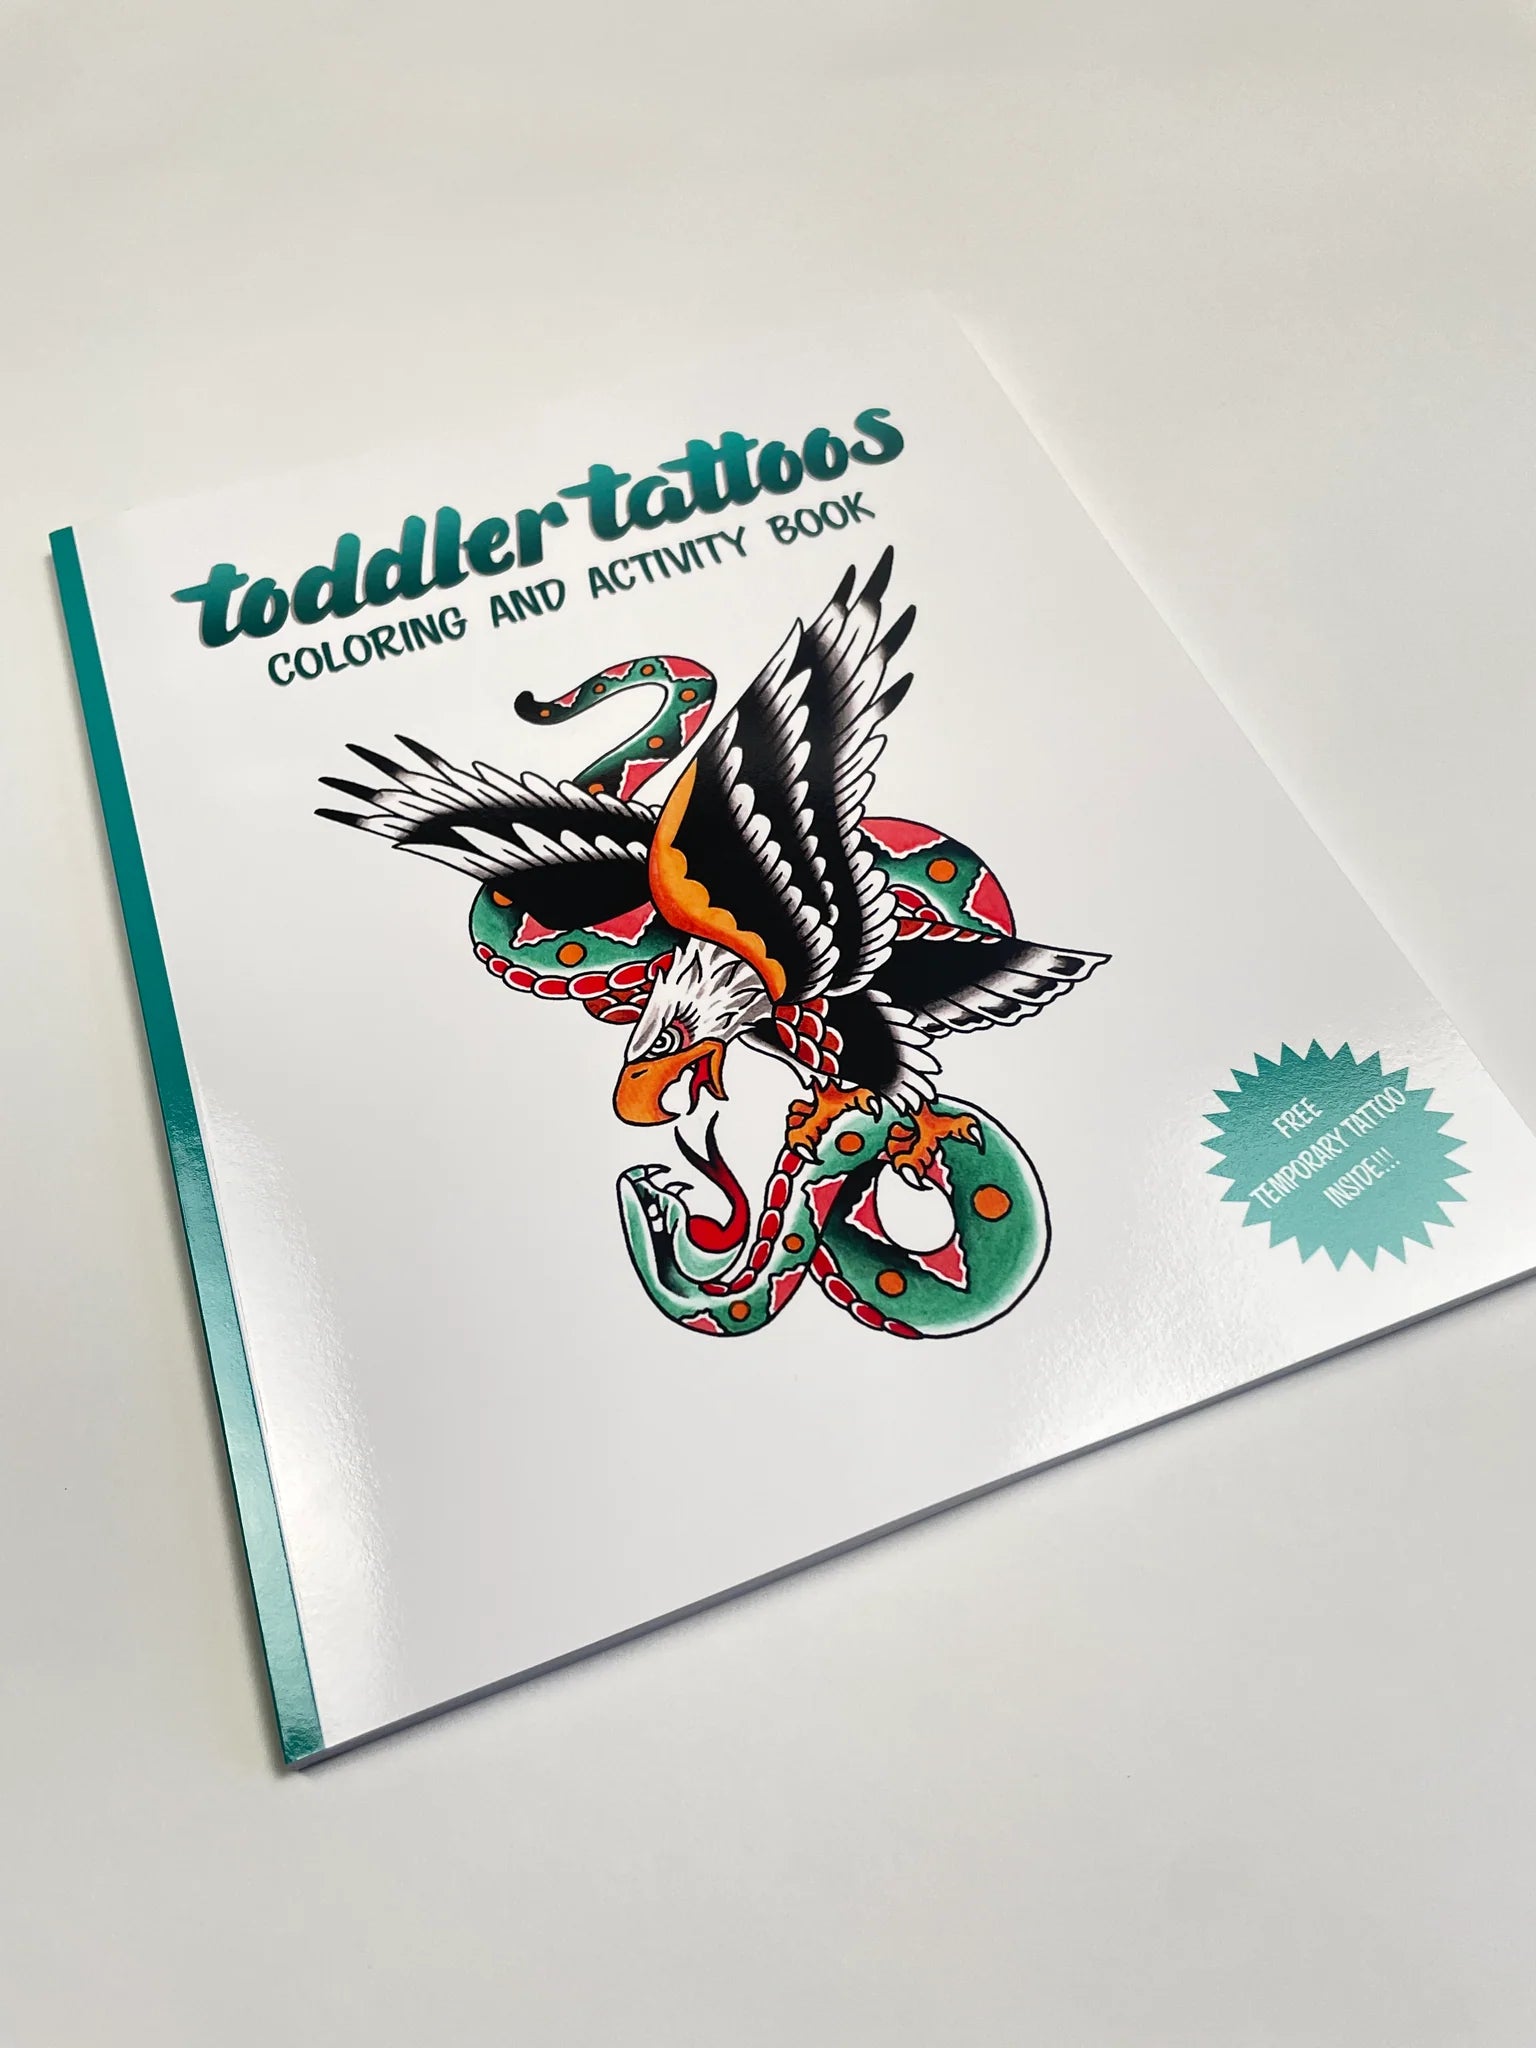 Toddler Tattoos Coloring and Activity Book Vol.1 And Temporary Tattoos